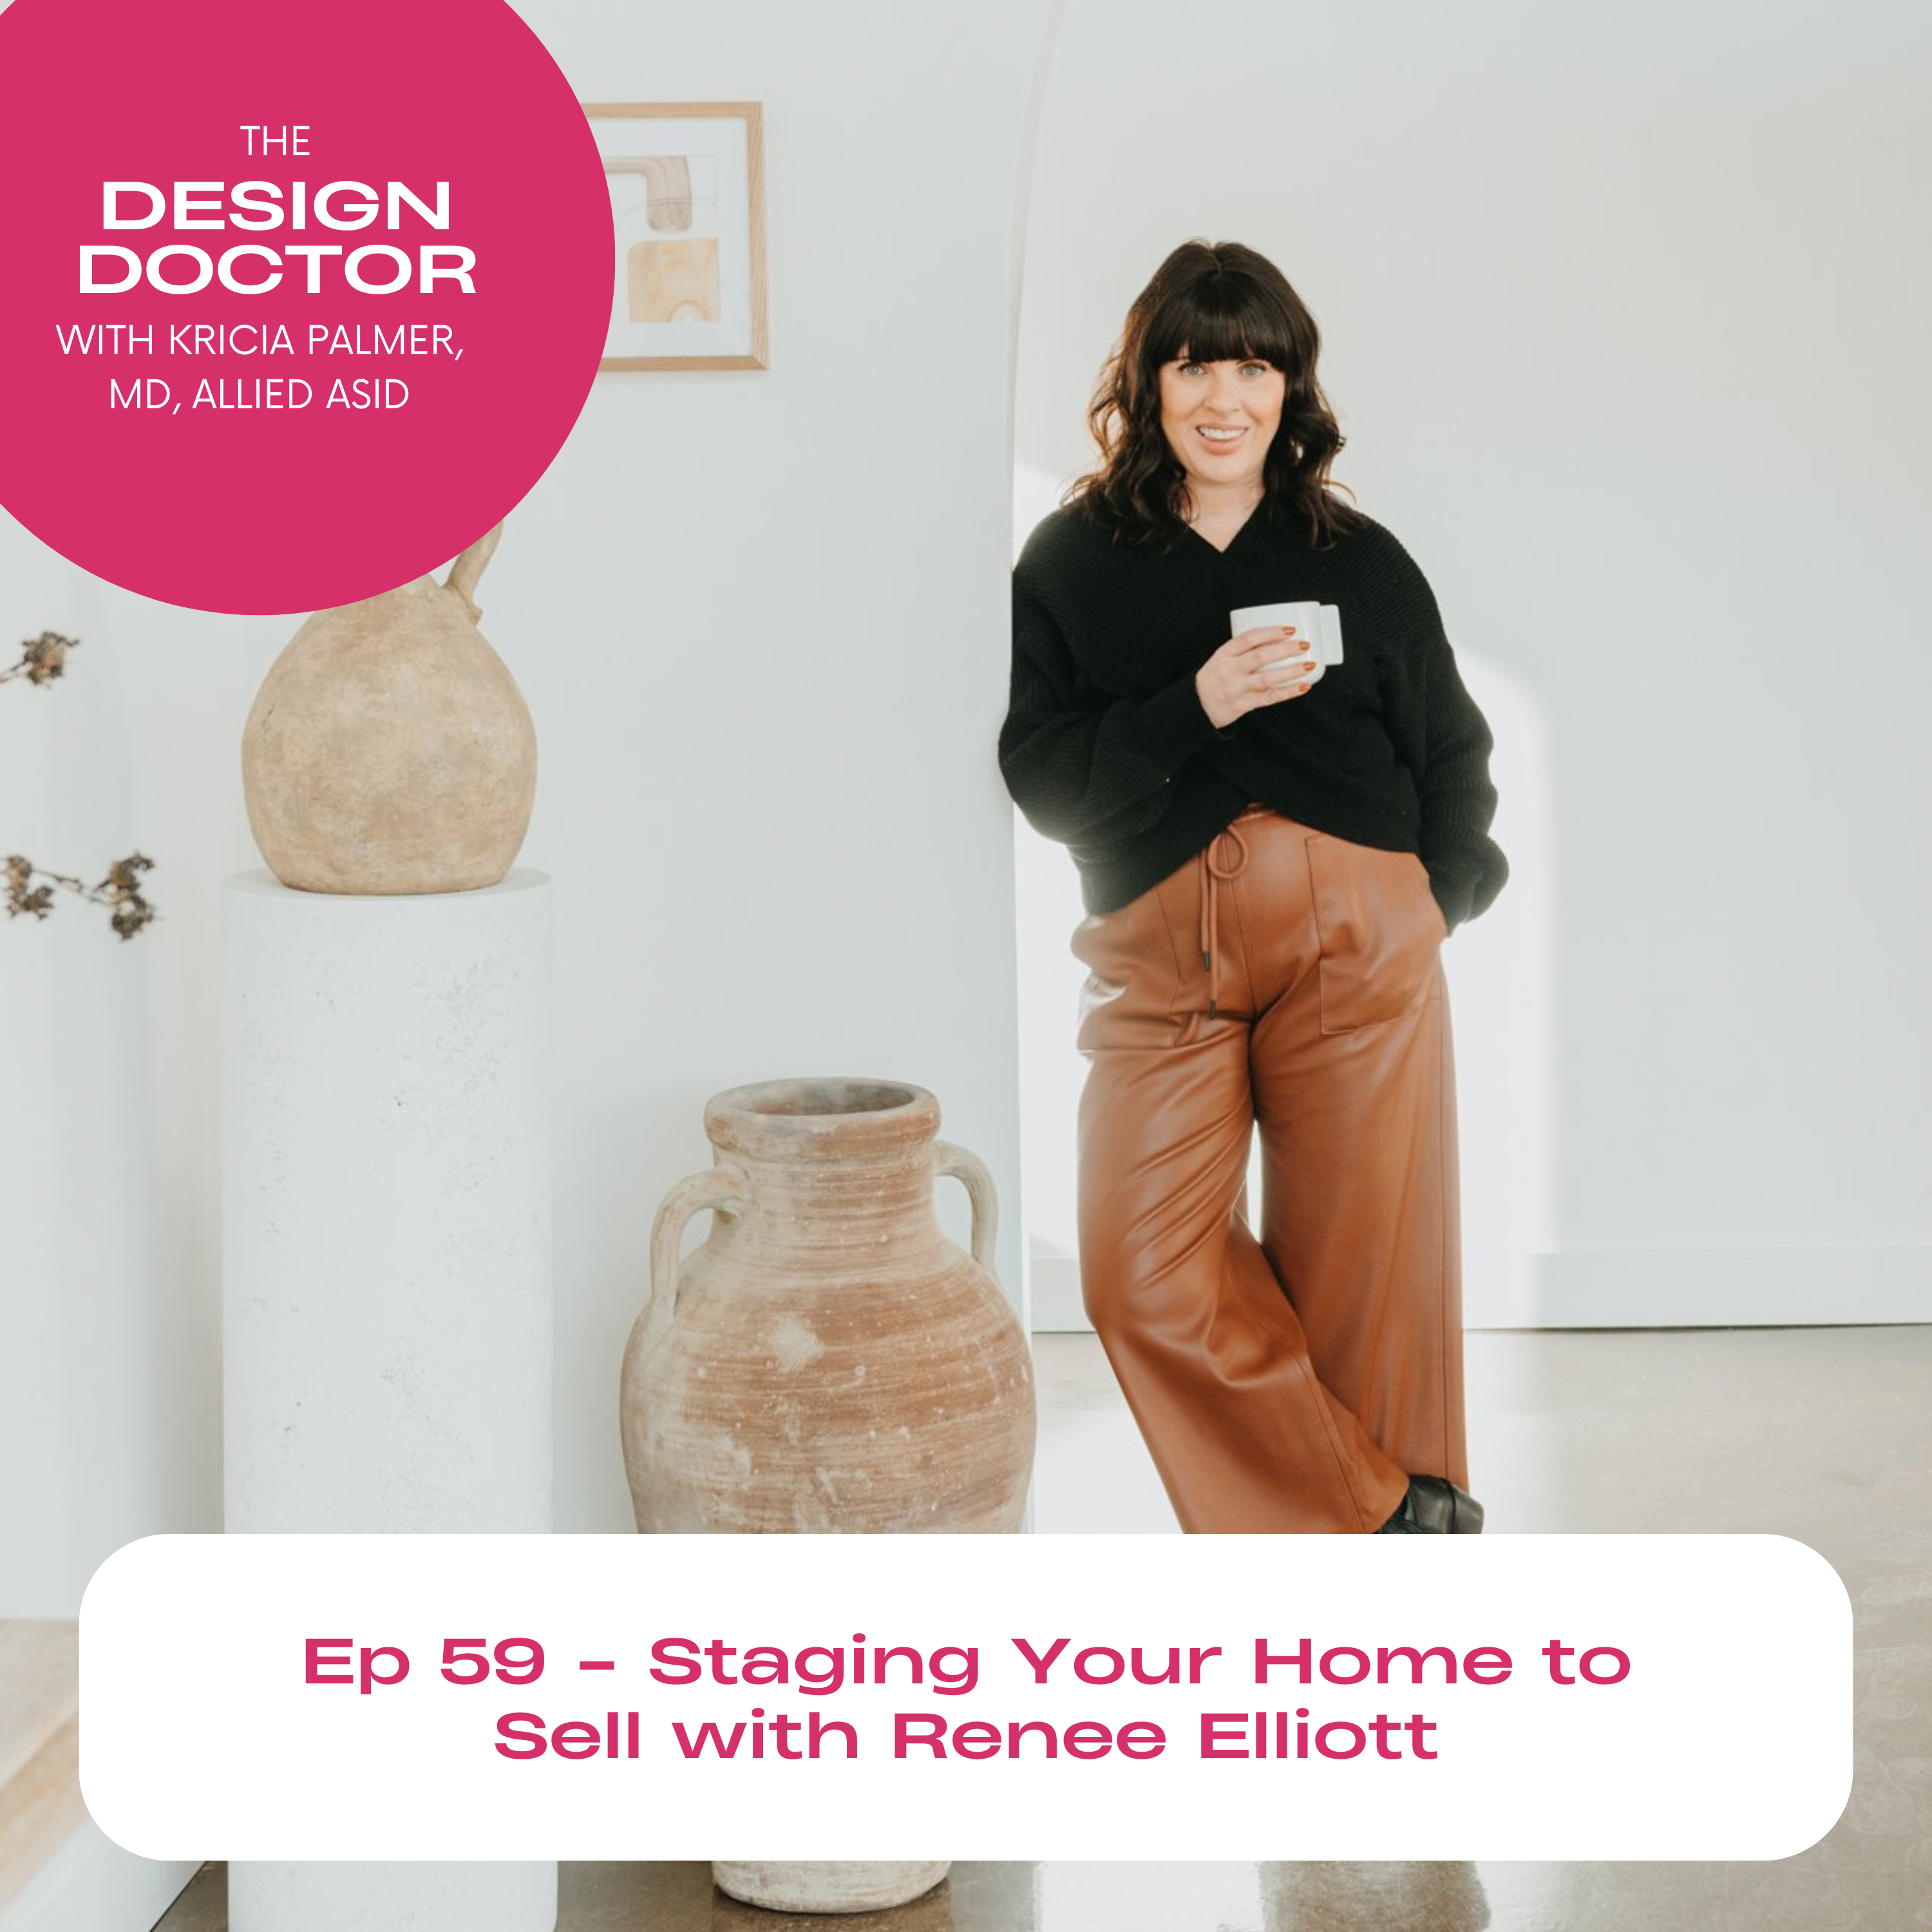 Episode 59 Staging Your Home to Sell with Renee Elliott